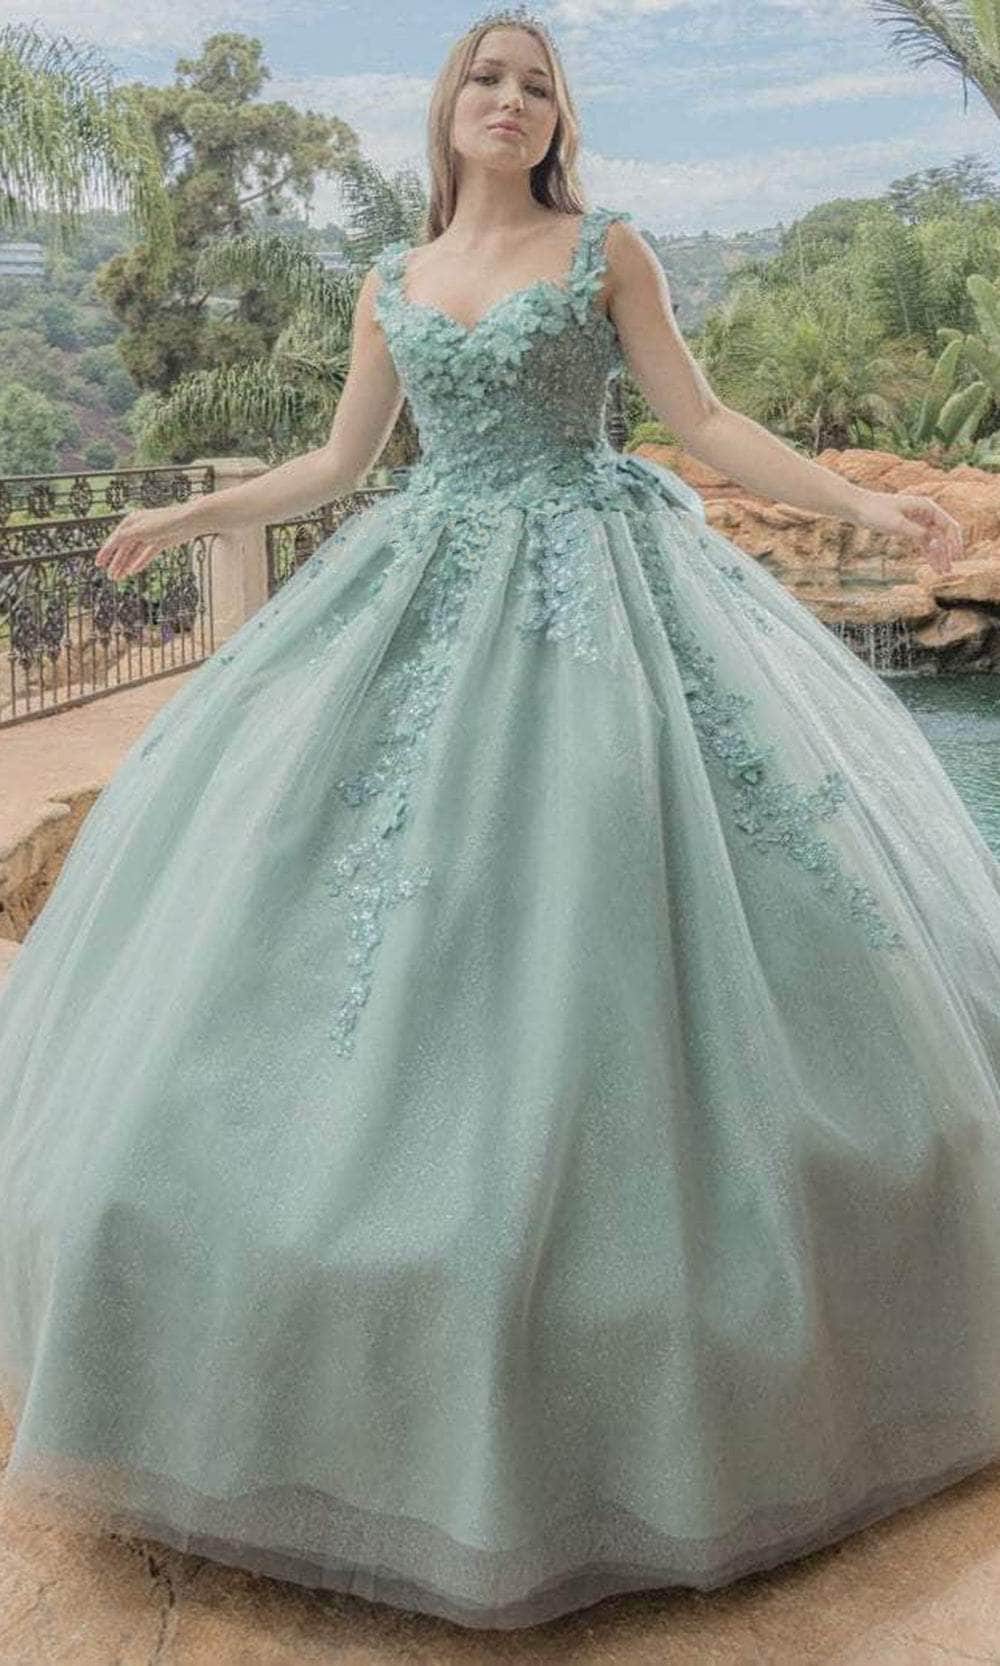 May Queen LK235 - Embroidered Gown